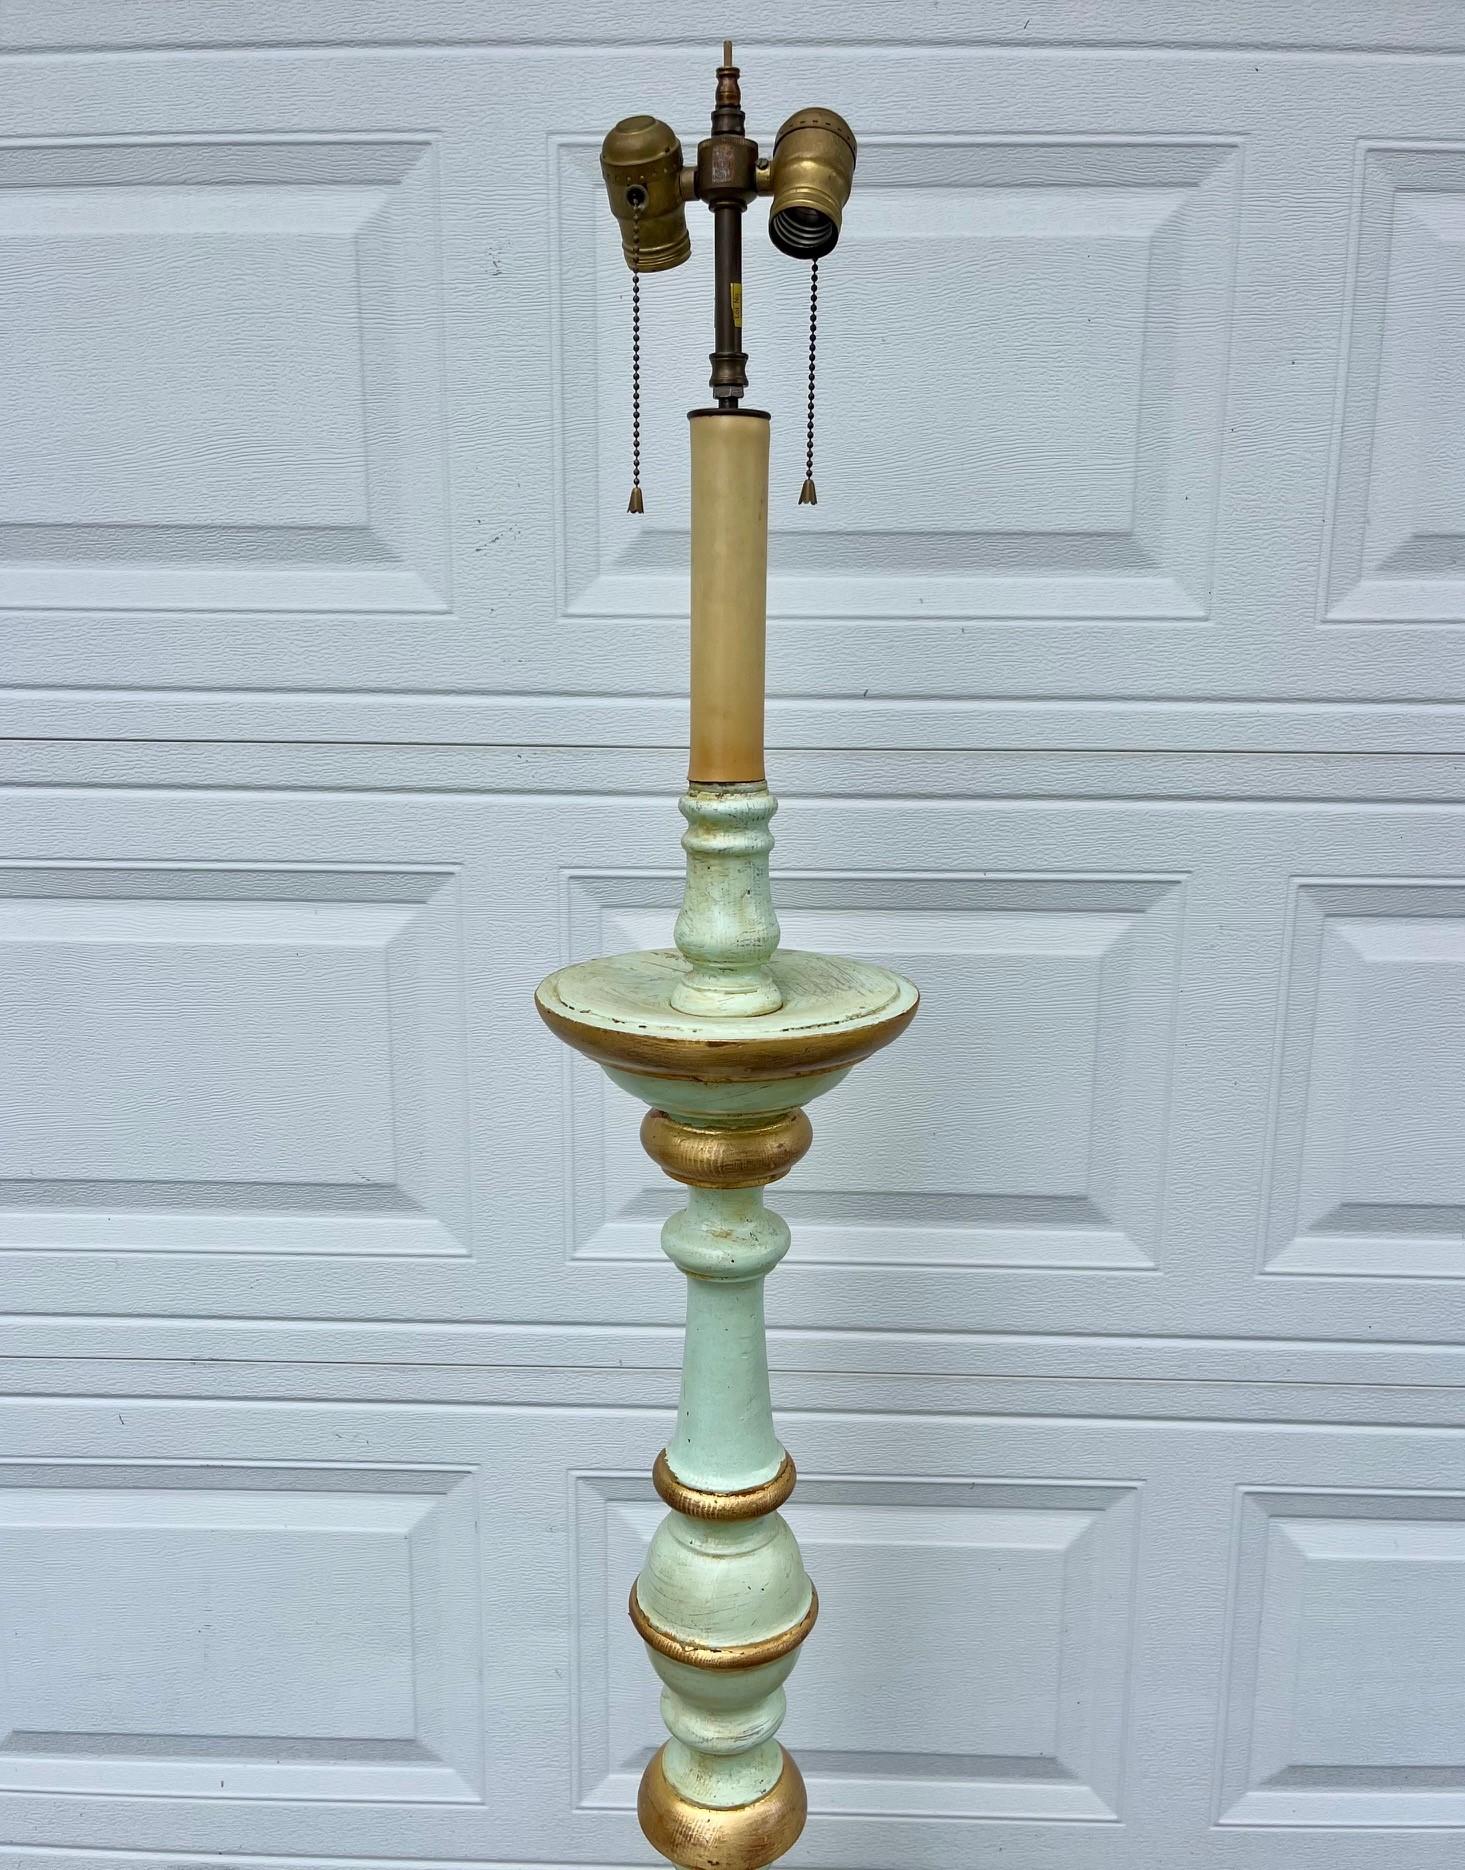 Antique Italian Wood Carved Baroque Style Torchiere Two Light Floor Lamp.

Early 20th century hand carved and turned Baroque style two light electrified torchiere. The turned body is polychrome painted in Venetian green with gilt parts. This floor